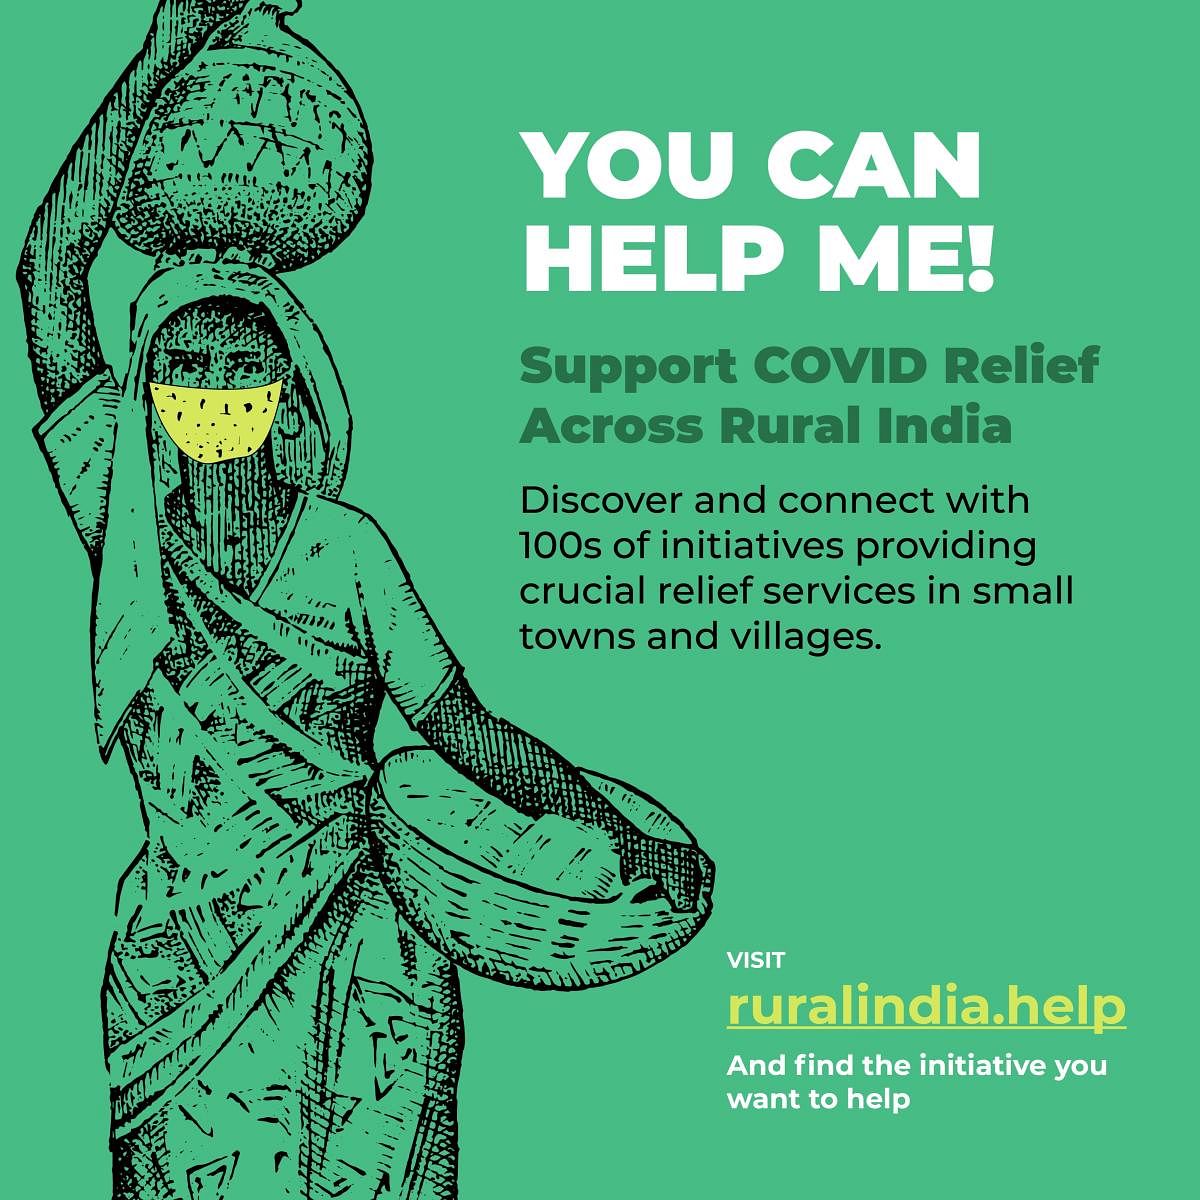 Initiatives for rural India